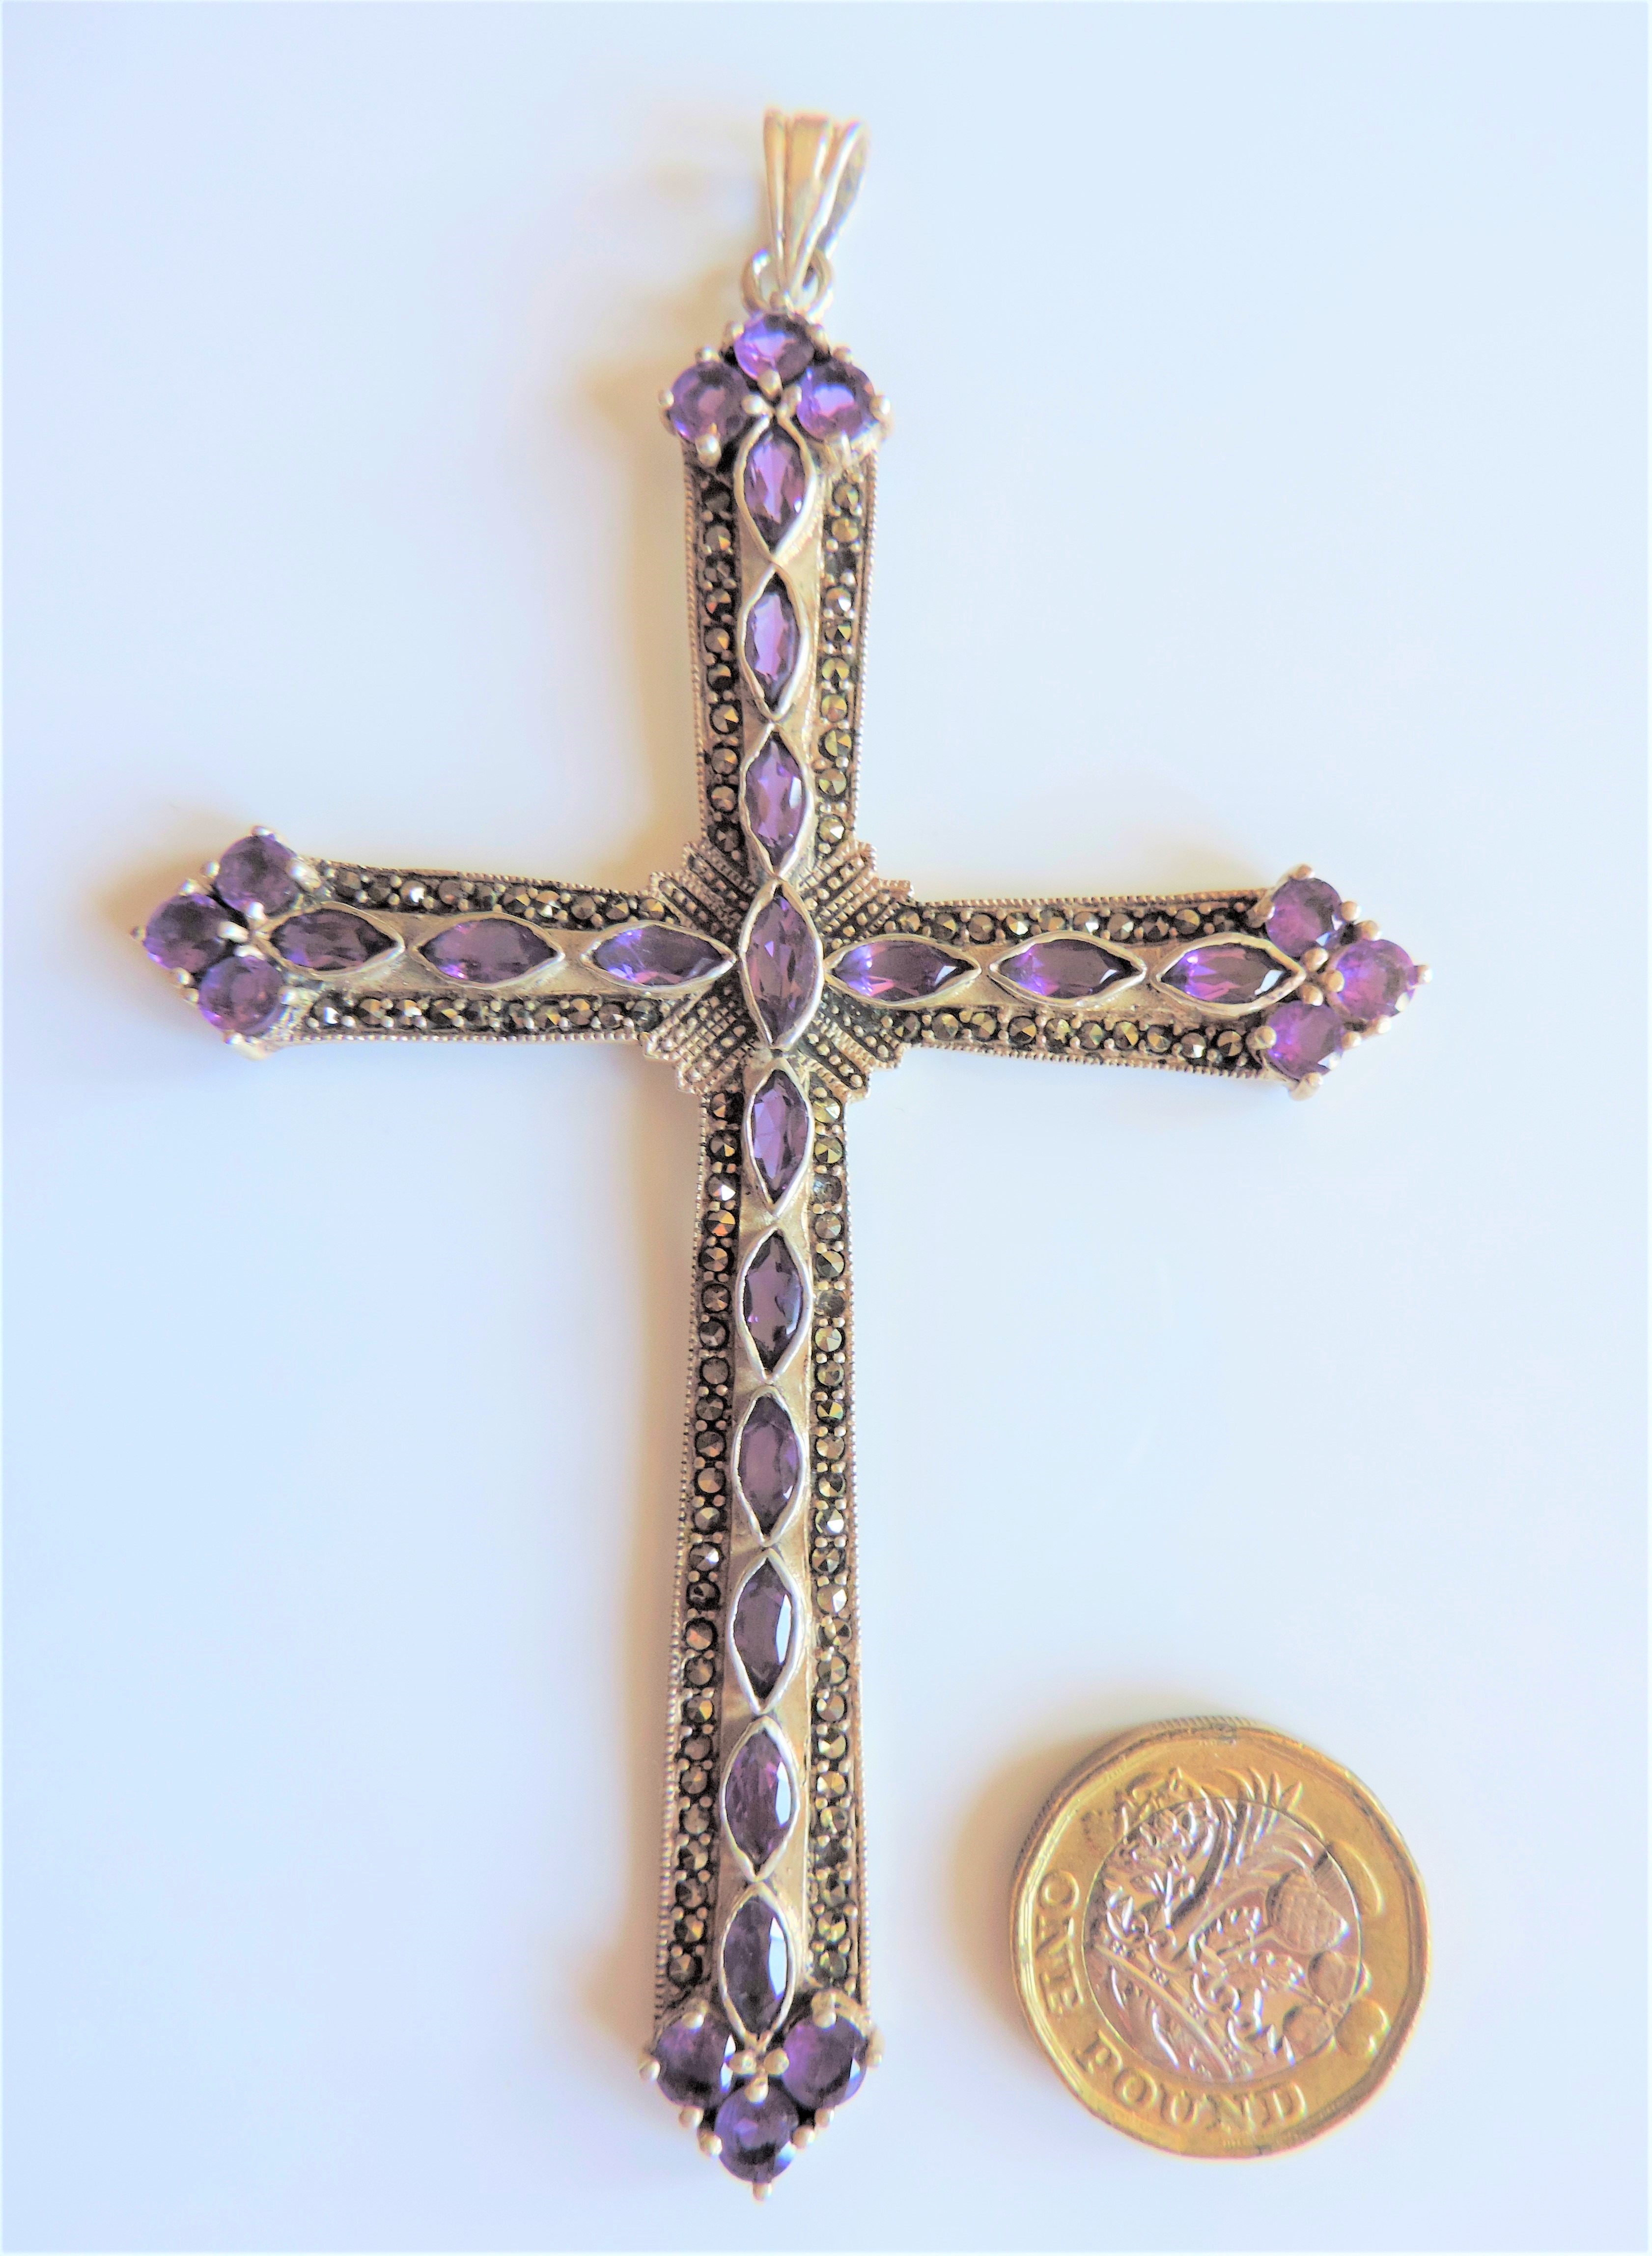 Large Vintage Sterling Silver 10ct Amethyst & Marcasite Cross Pendant 10cm Tall - Image 3 of 4